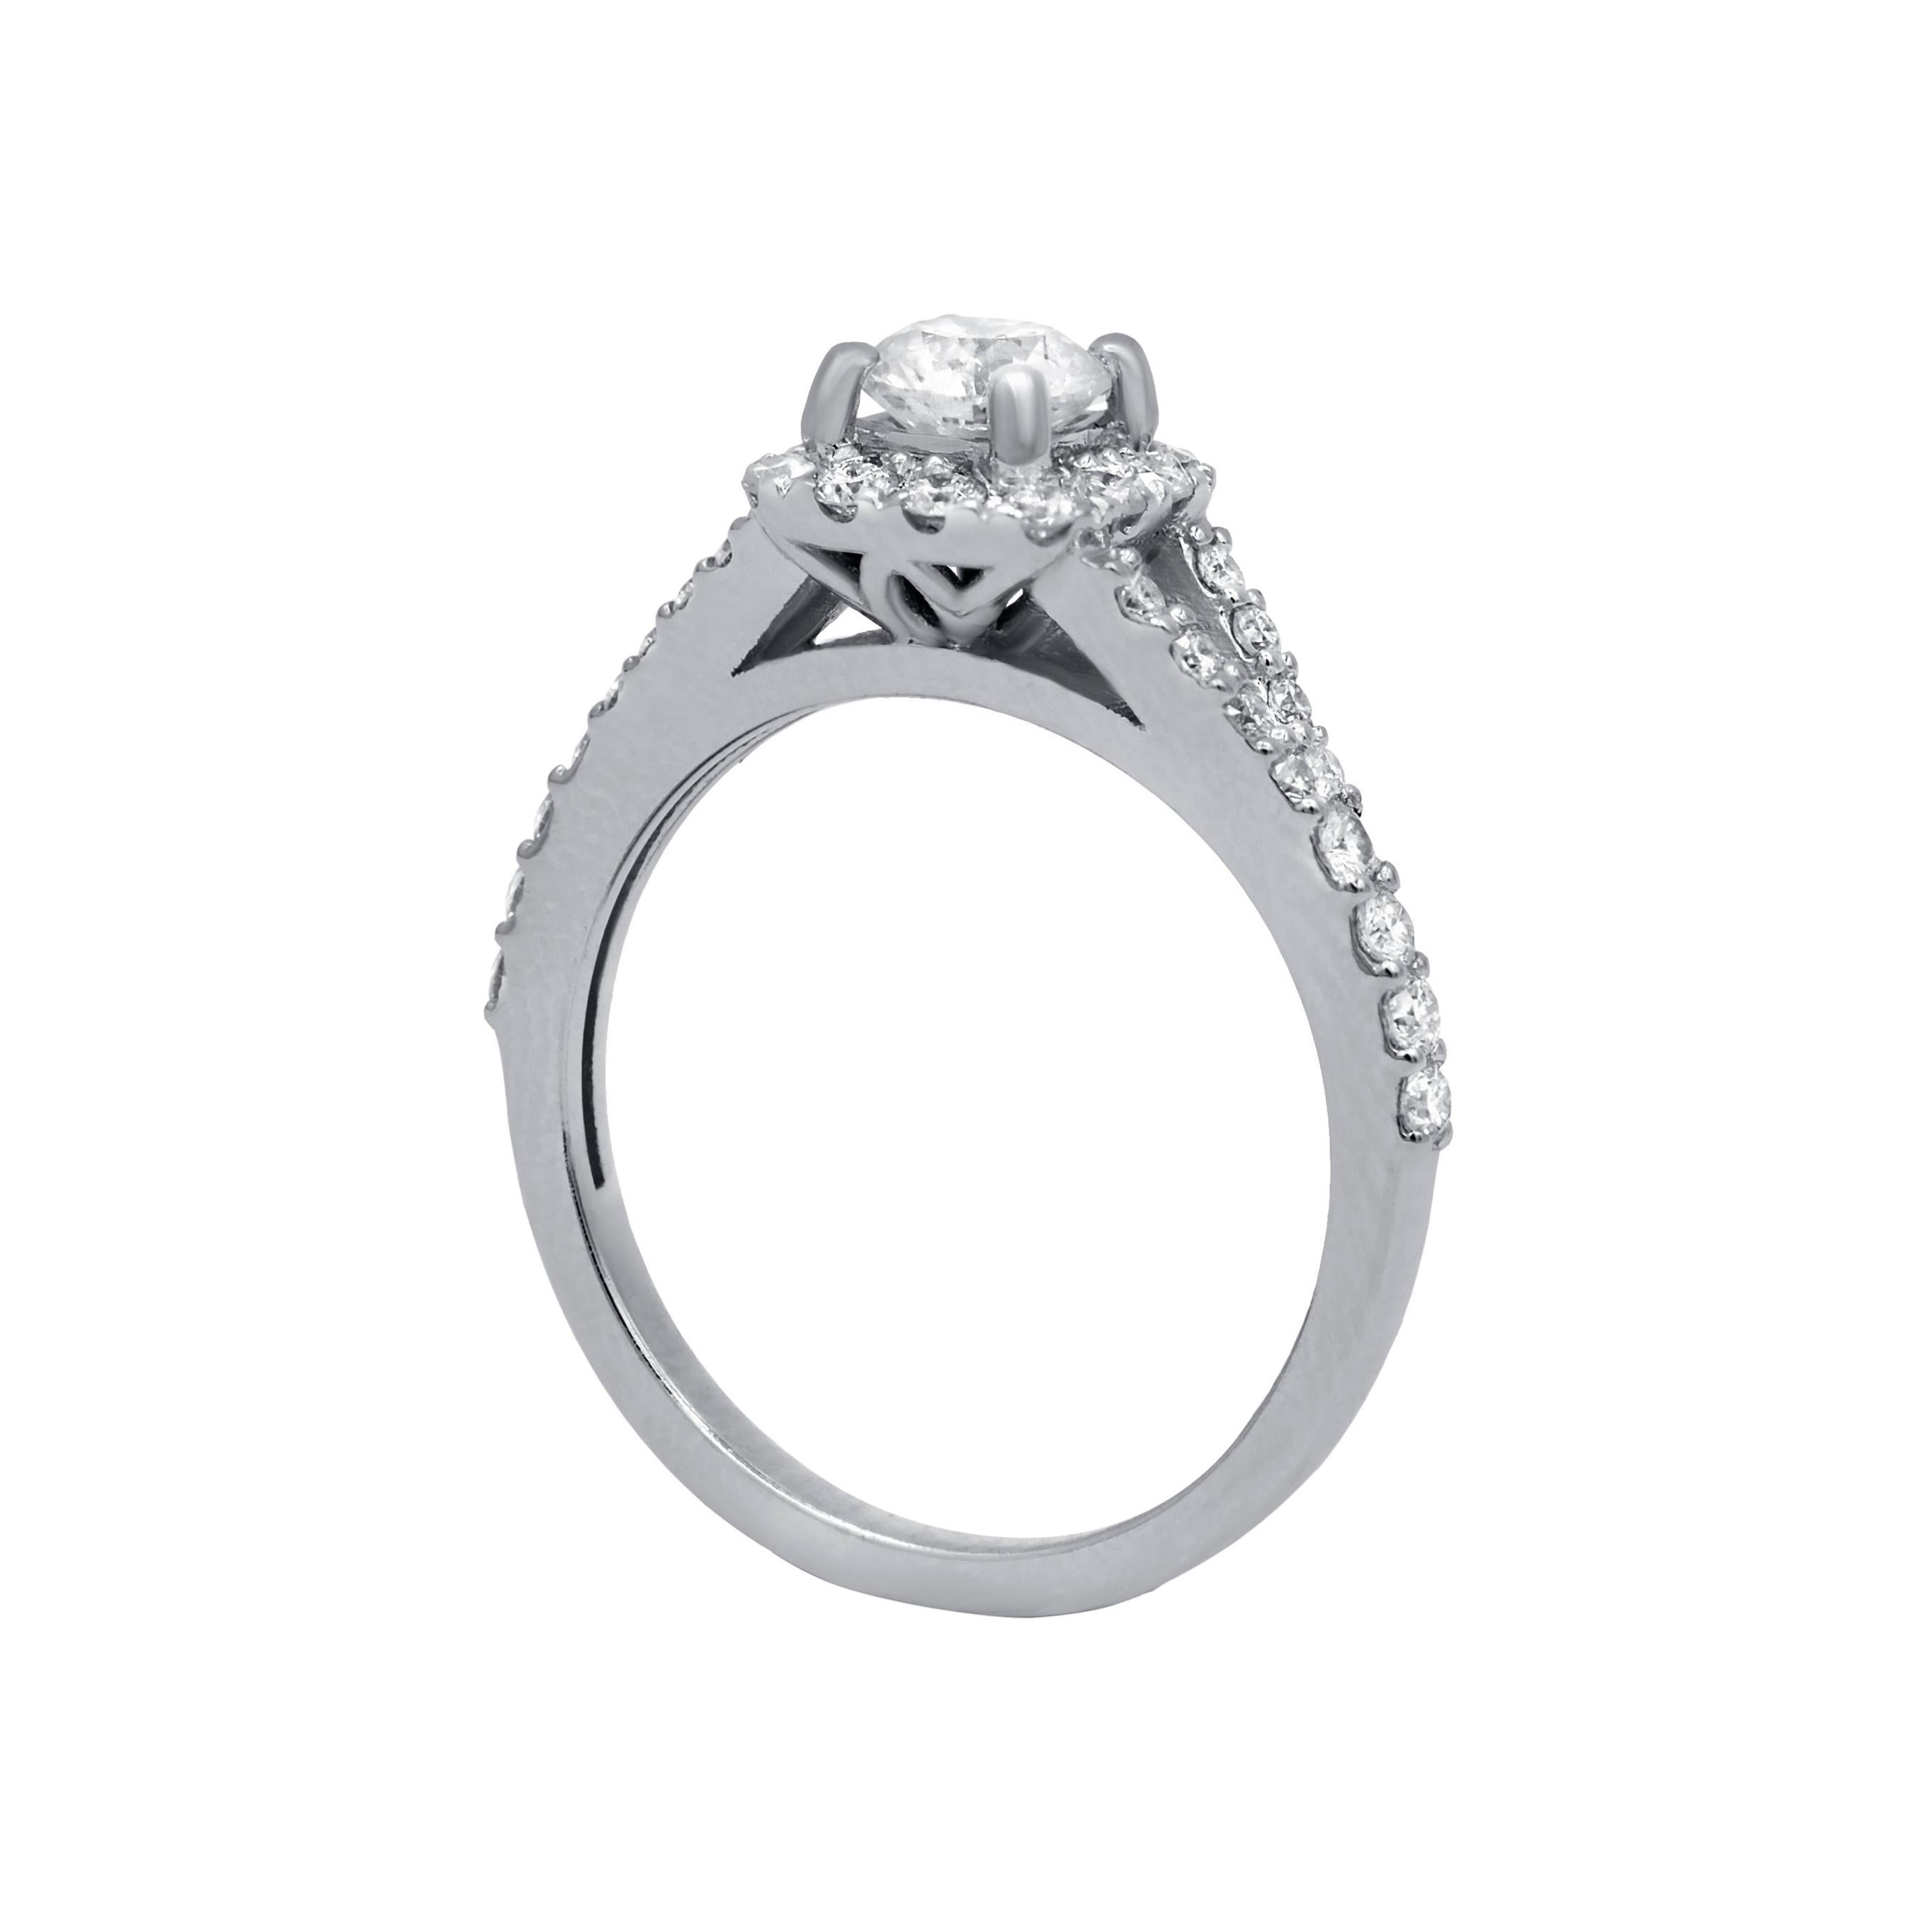 14kt diamond ring center .51ct round shape diamond in a halo and split shank setting .60cts of diamonds
